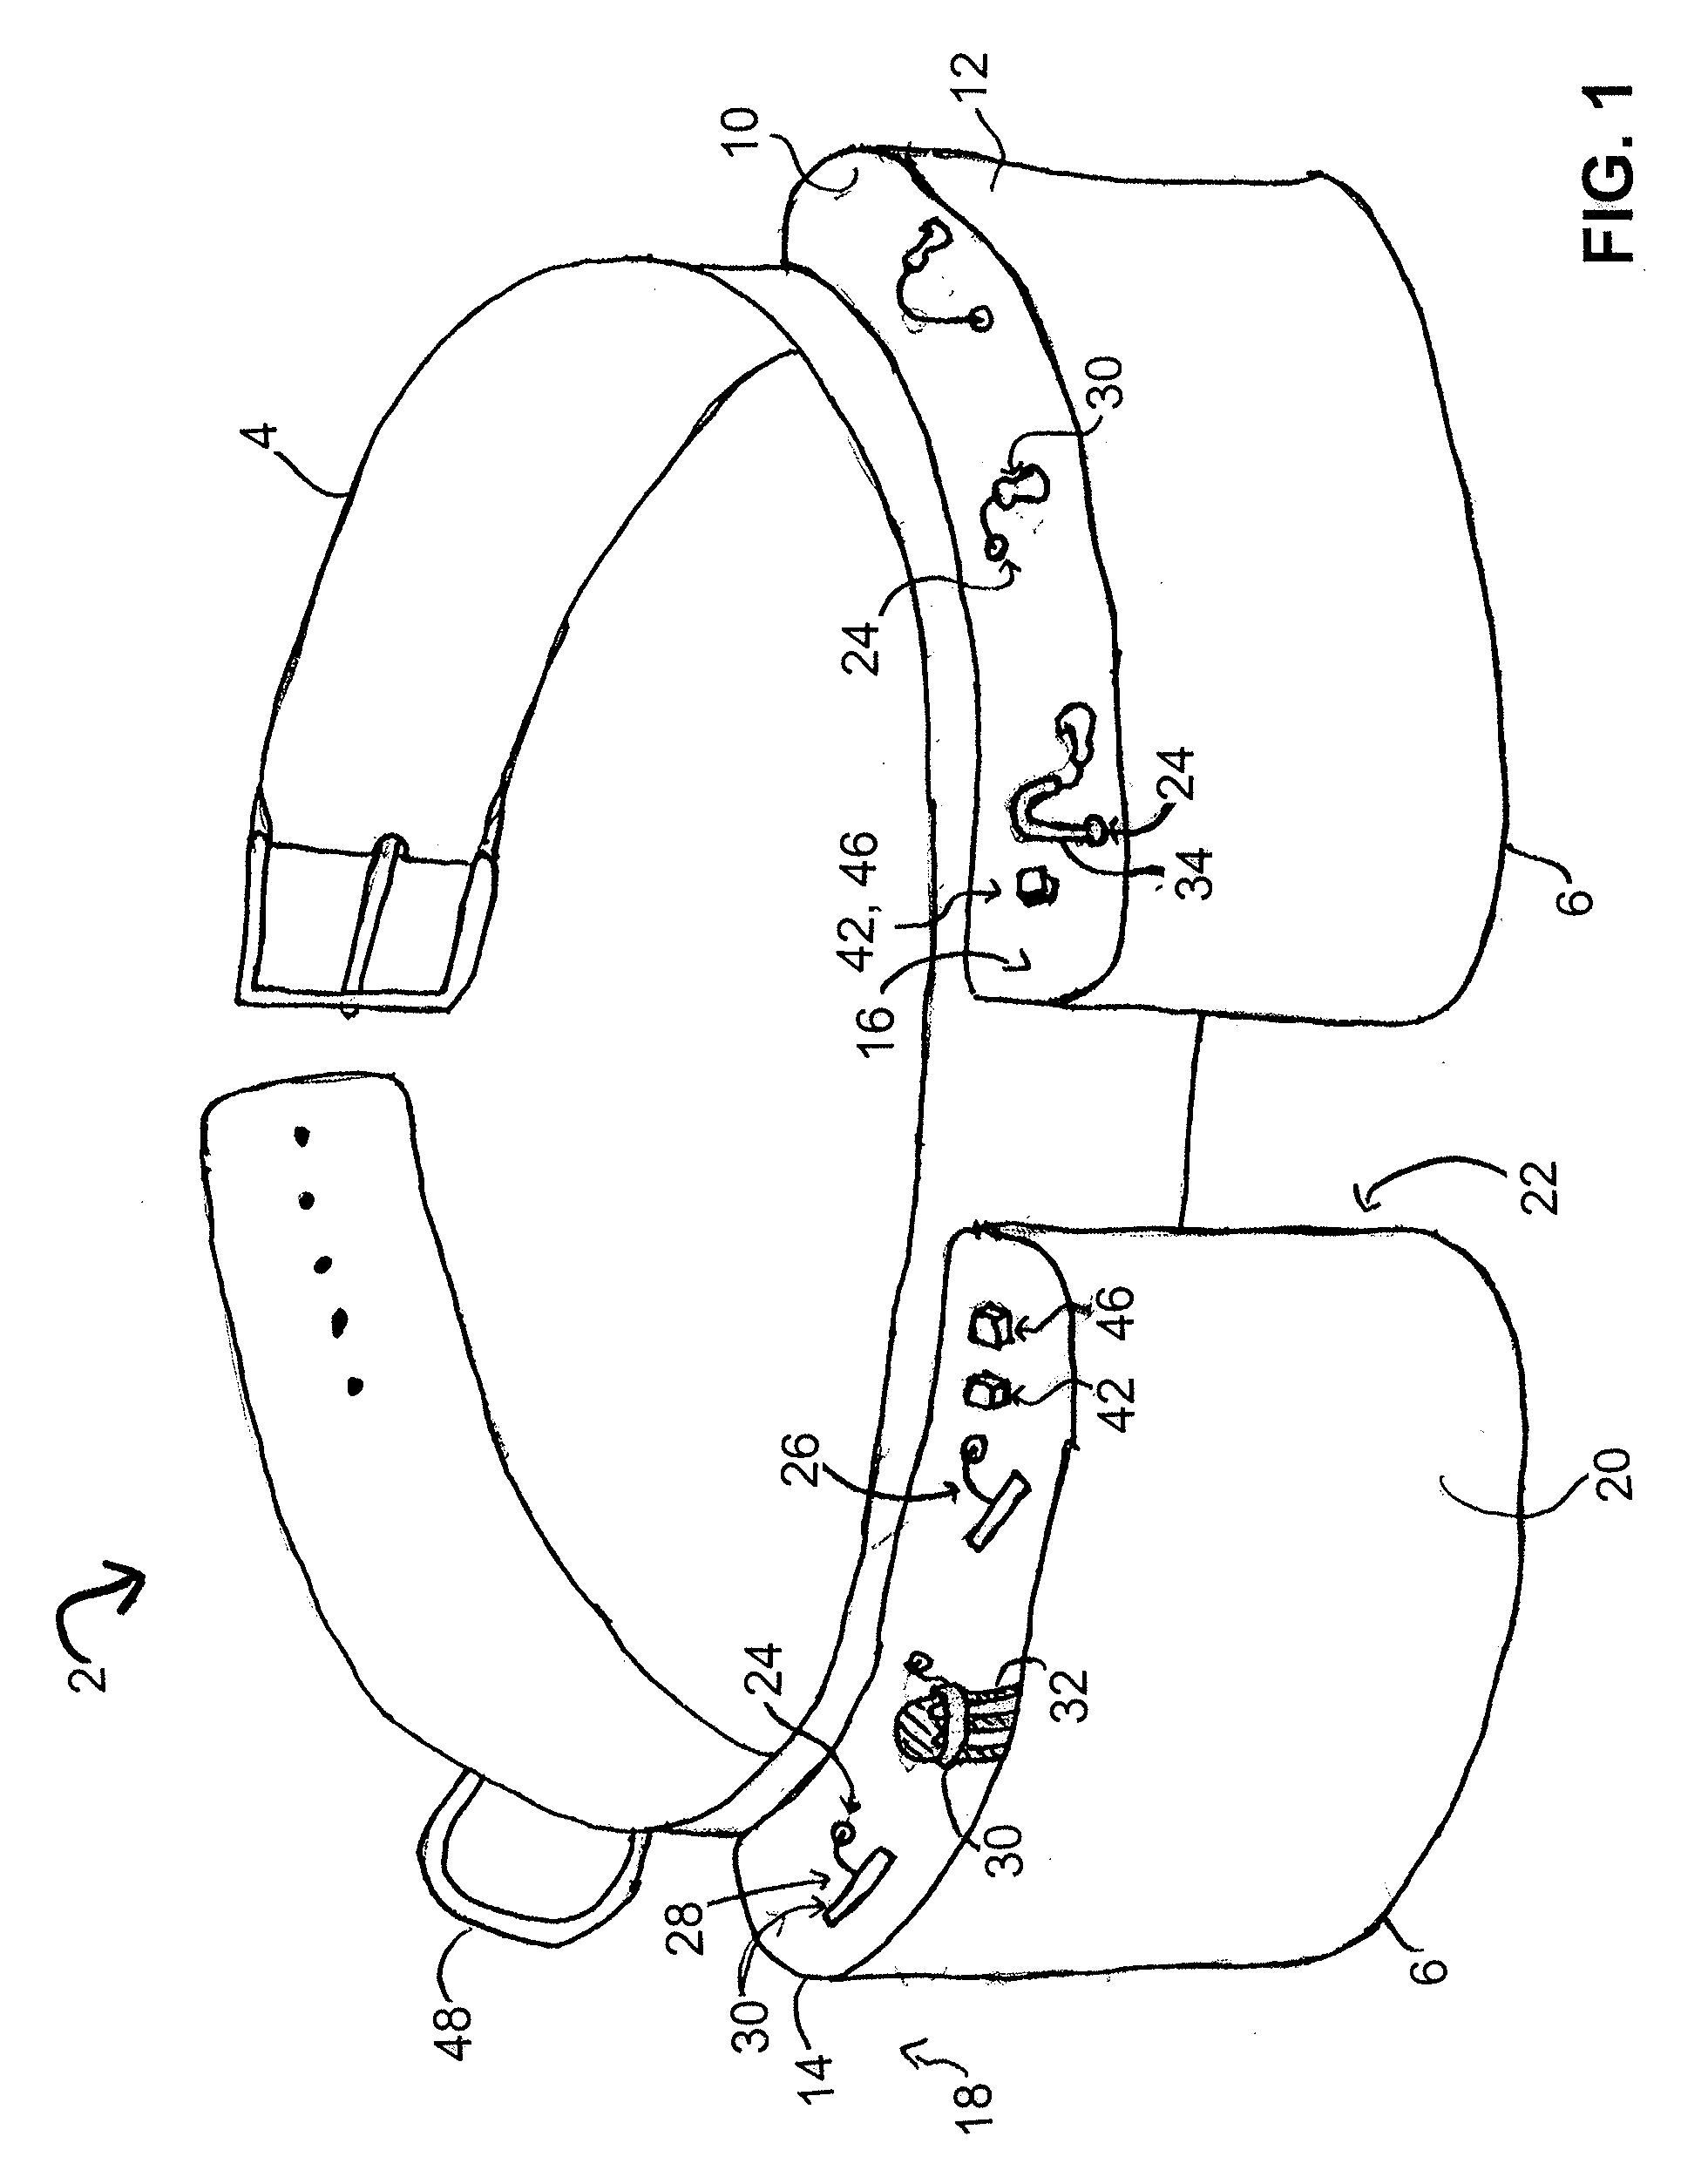 Tool belt with integrated tool retraction mechanism